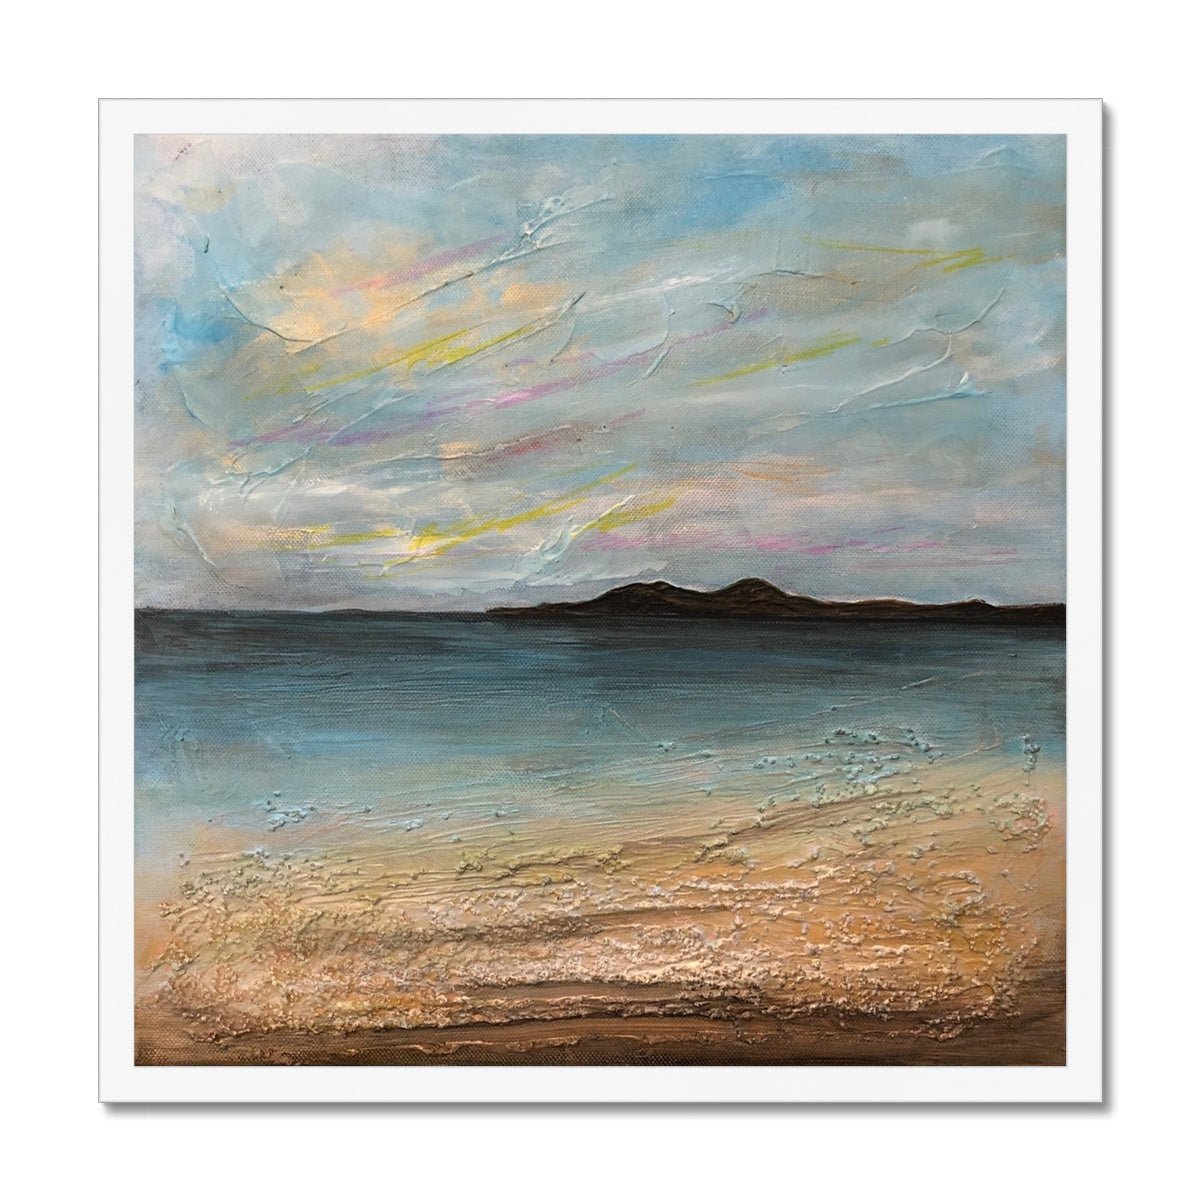 Garrynamonie Beach South Uist Painting | Framed Prints From Scotland-Framed Prints-Hebridean Islands Art Gallery-20"x20"-White Frame-Paintings, Prints, Homeware, Art Gifts From Scotland By Scottish Artist Kevin Hunter